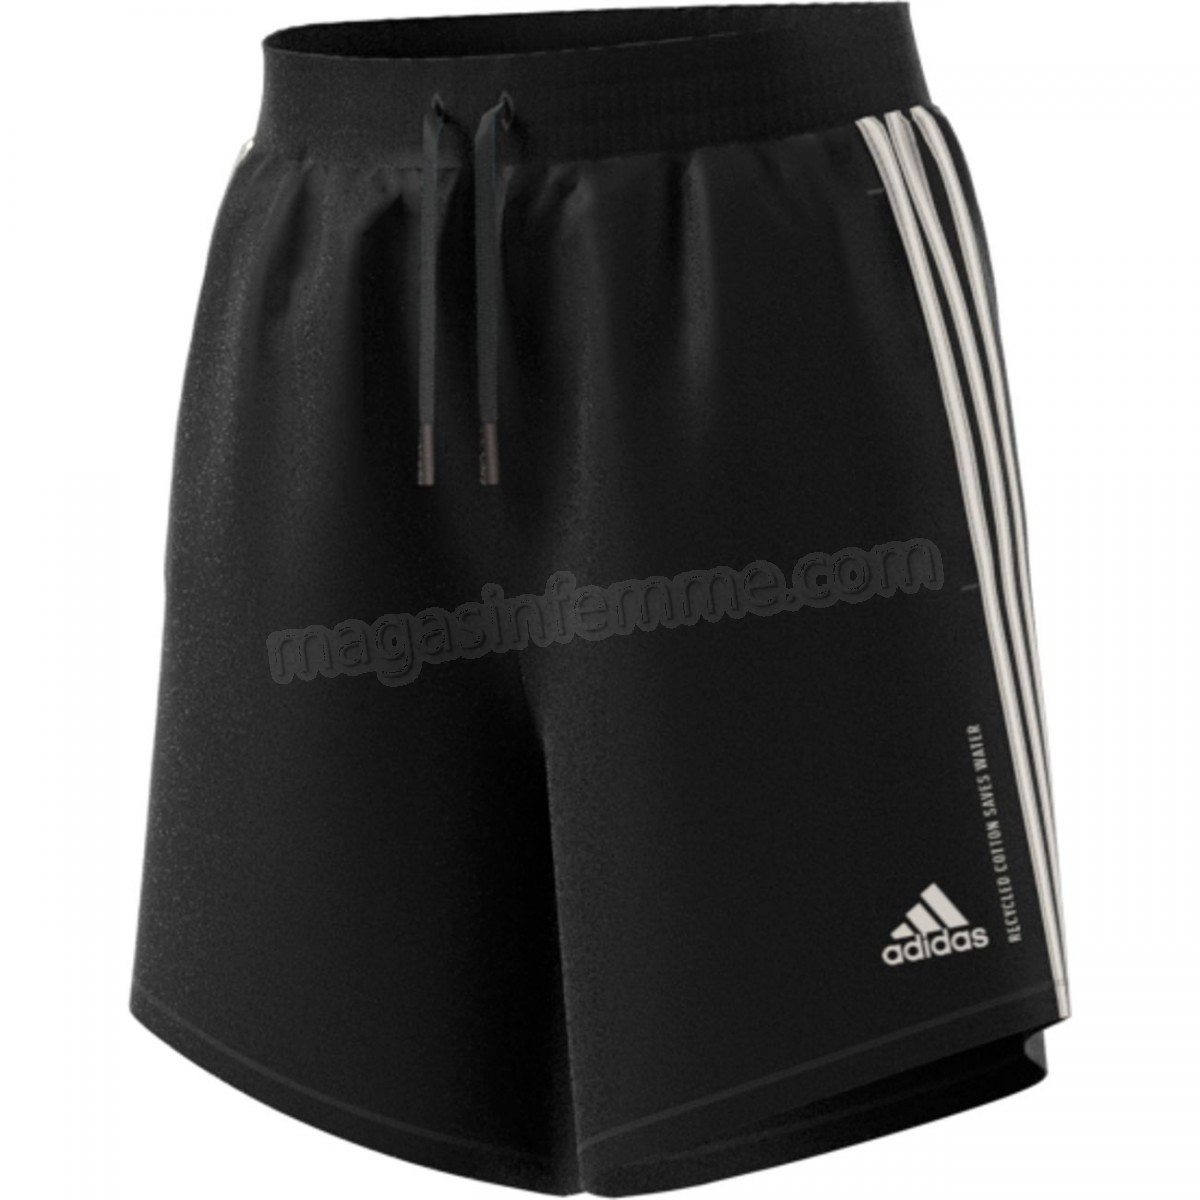 Adidas-Fitness femme ADIDAS Short femme adidas Must Haves Recycled Cotton en solde - -2